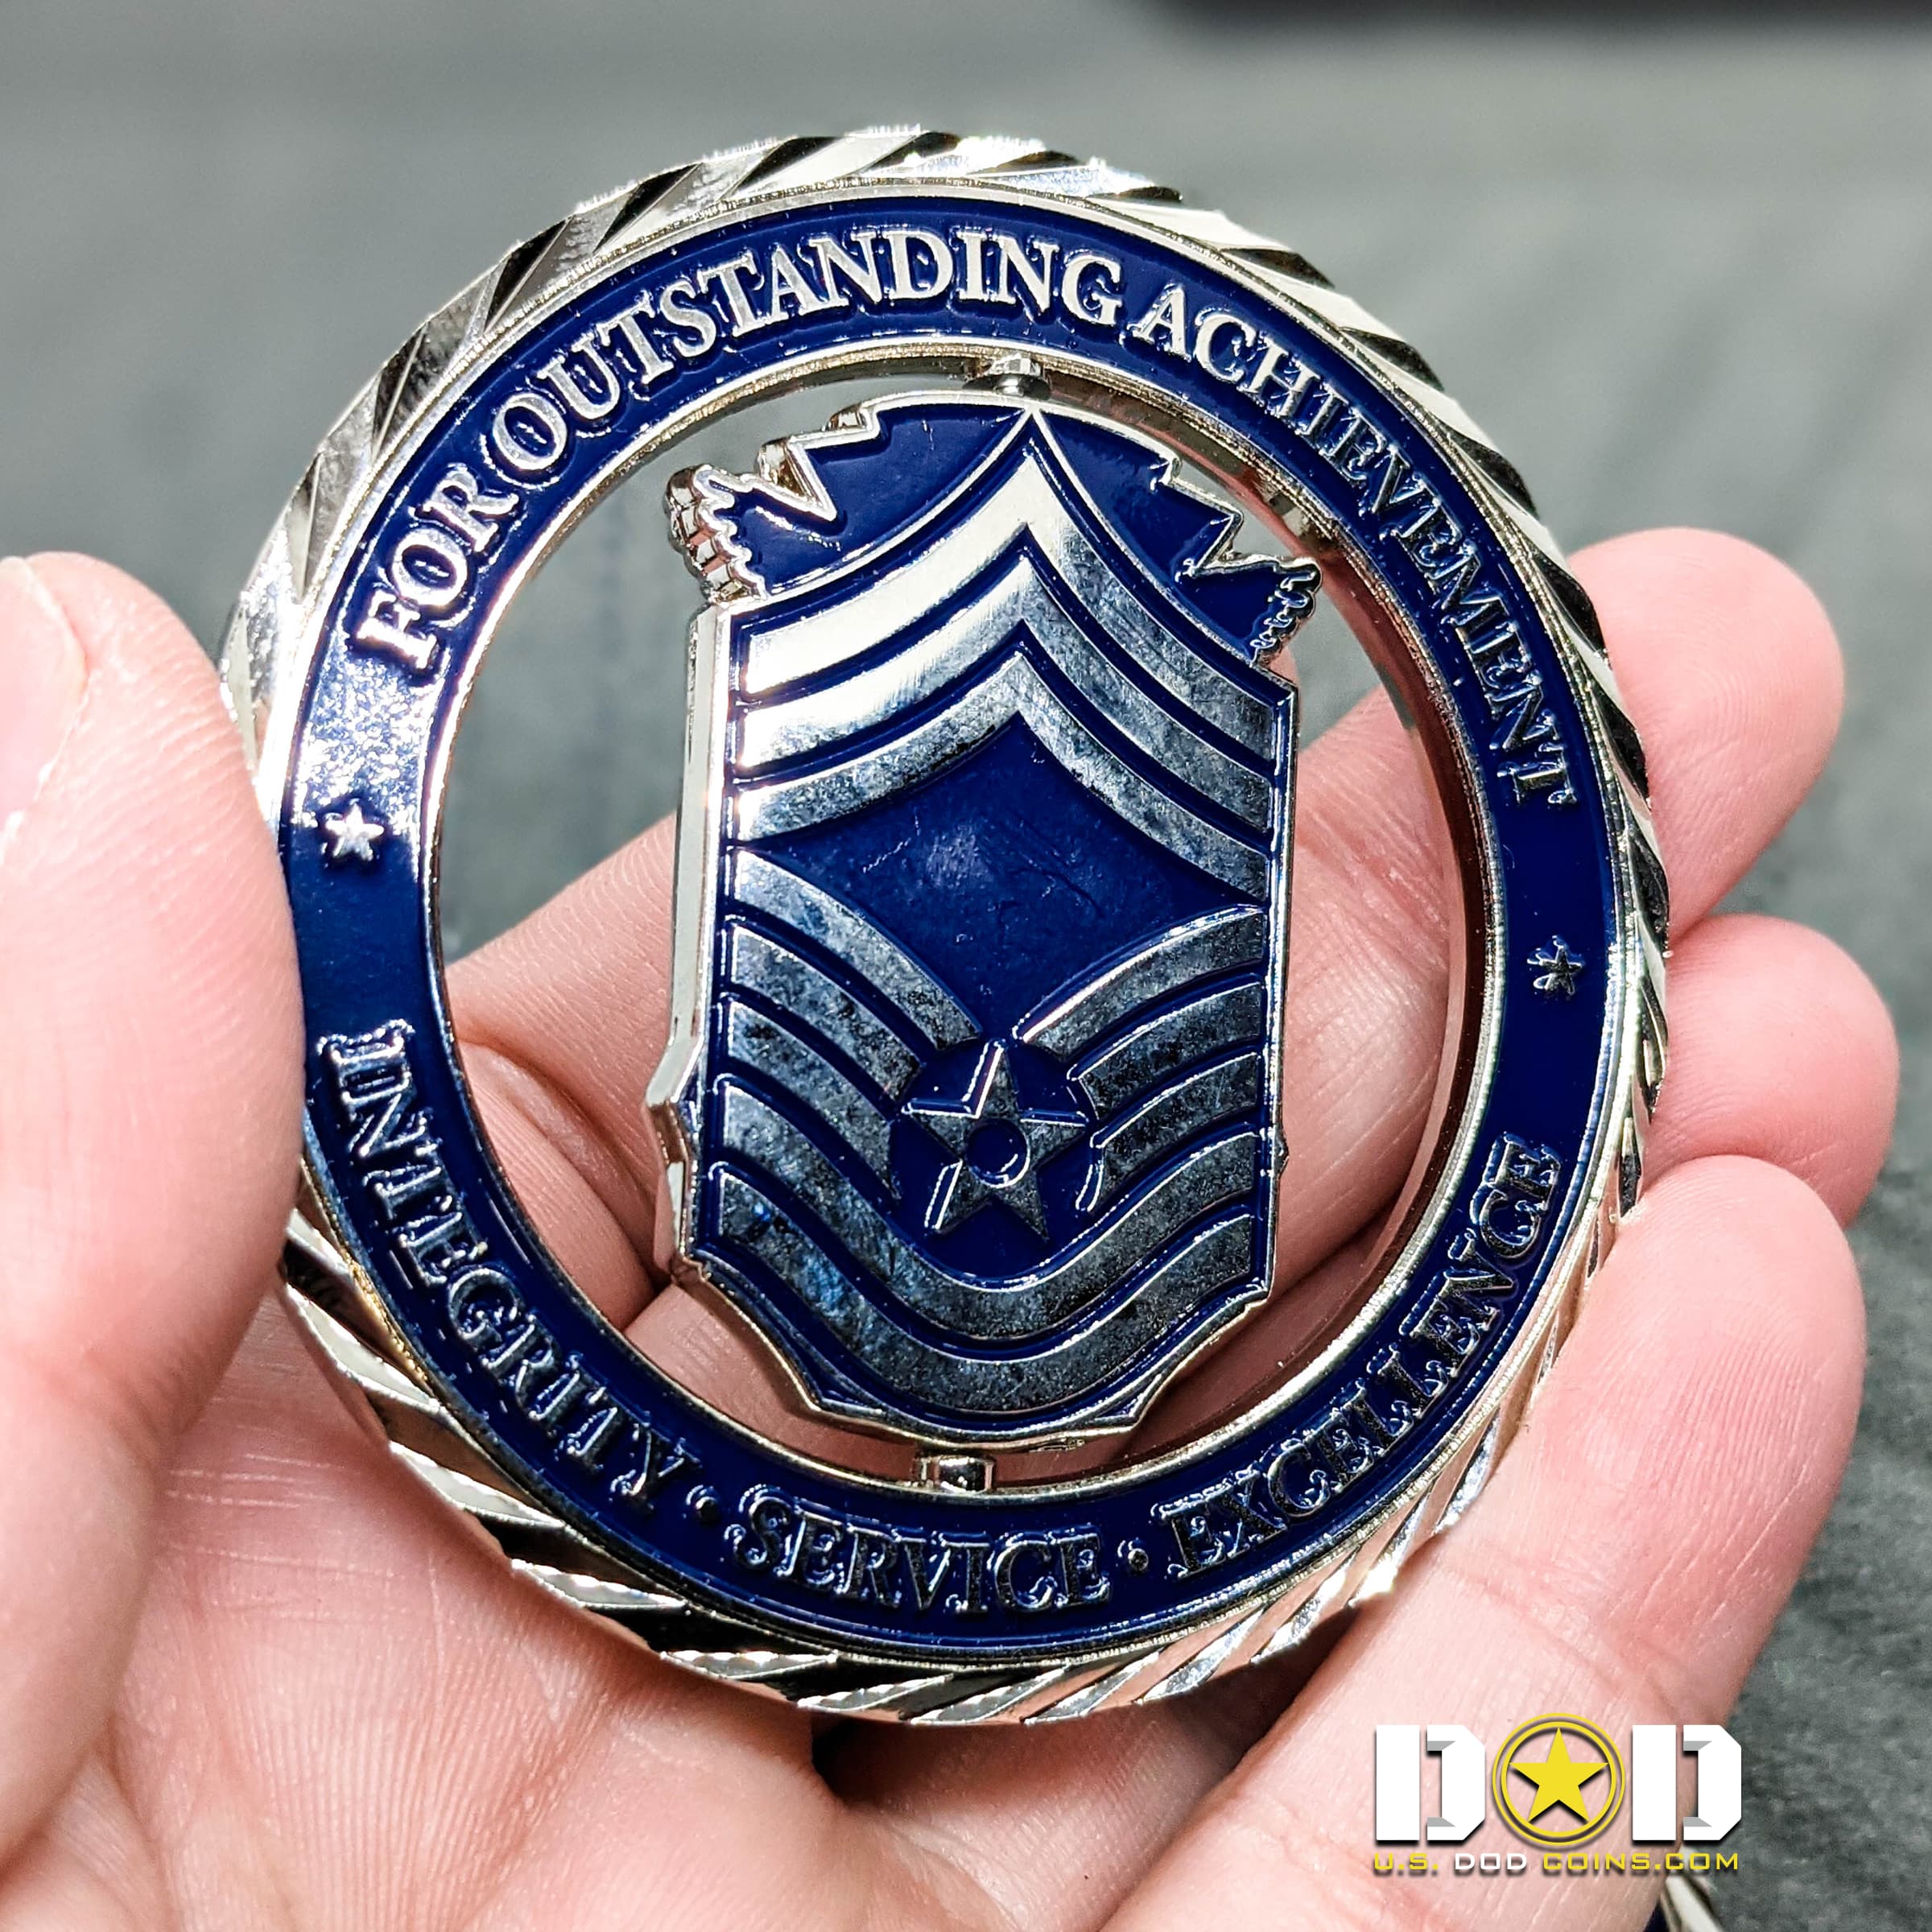 Security-Forces-Air-Force-Spinning-Challenge-Coin_0001_USDODCoins-Challenge-Coins-Examples-100